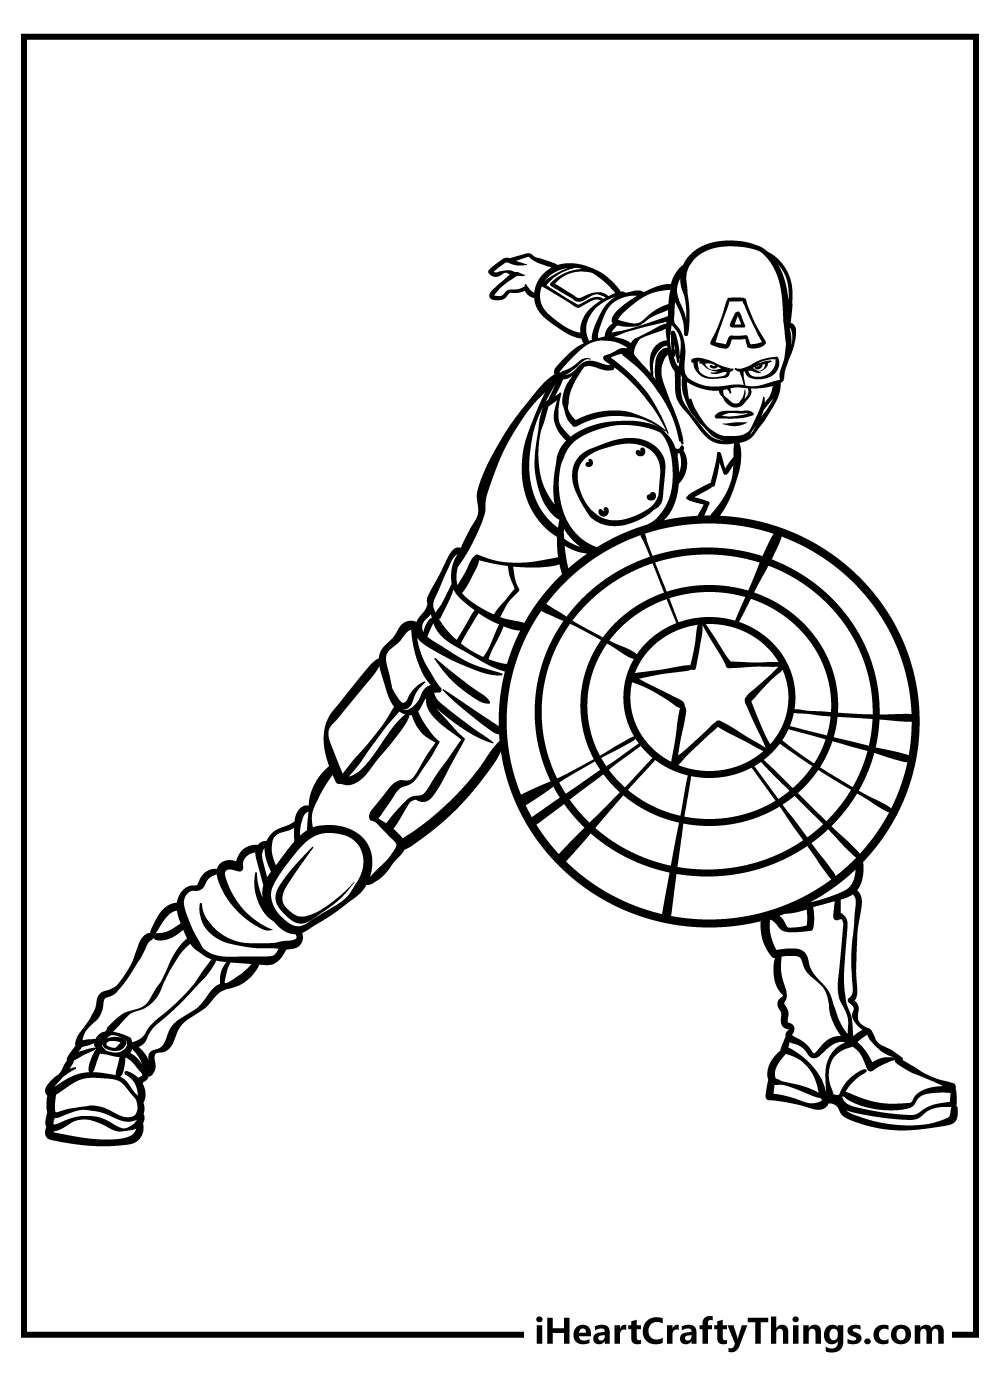 Printable Avengers Coloring Pages Updated 20